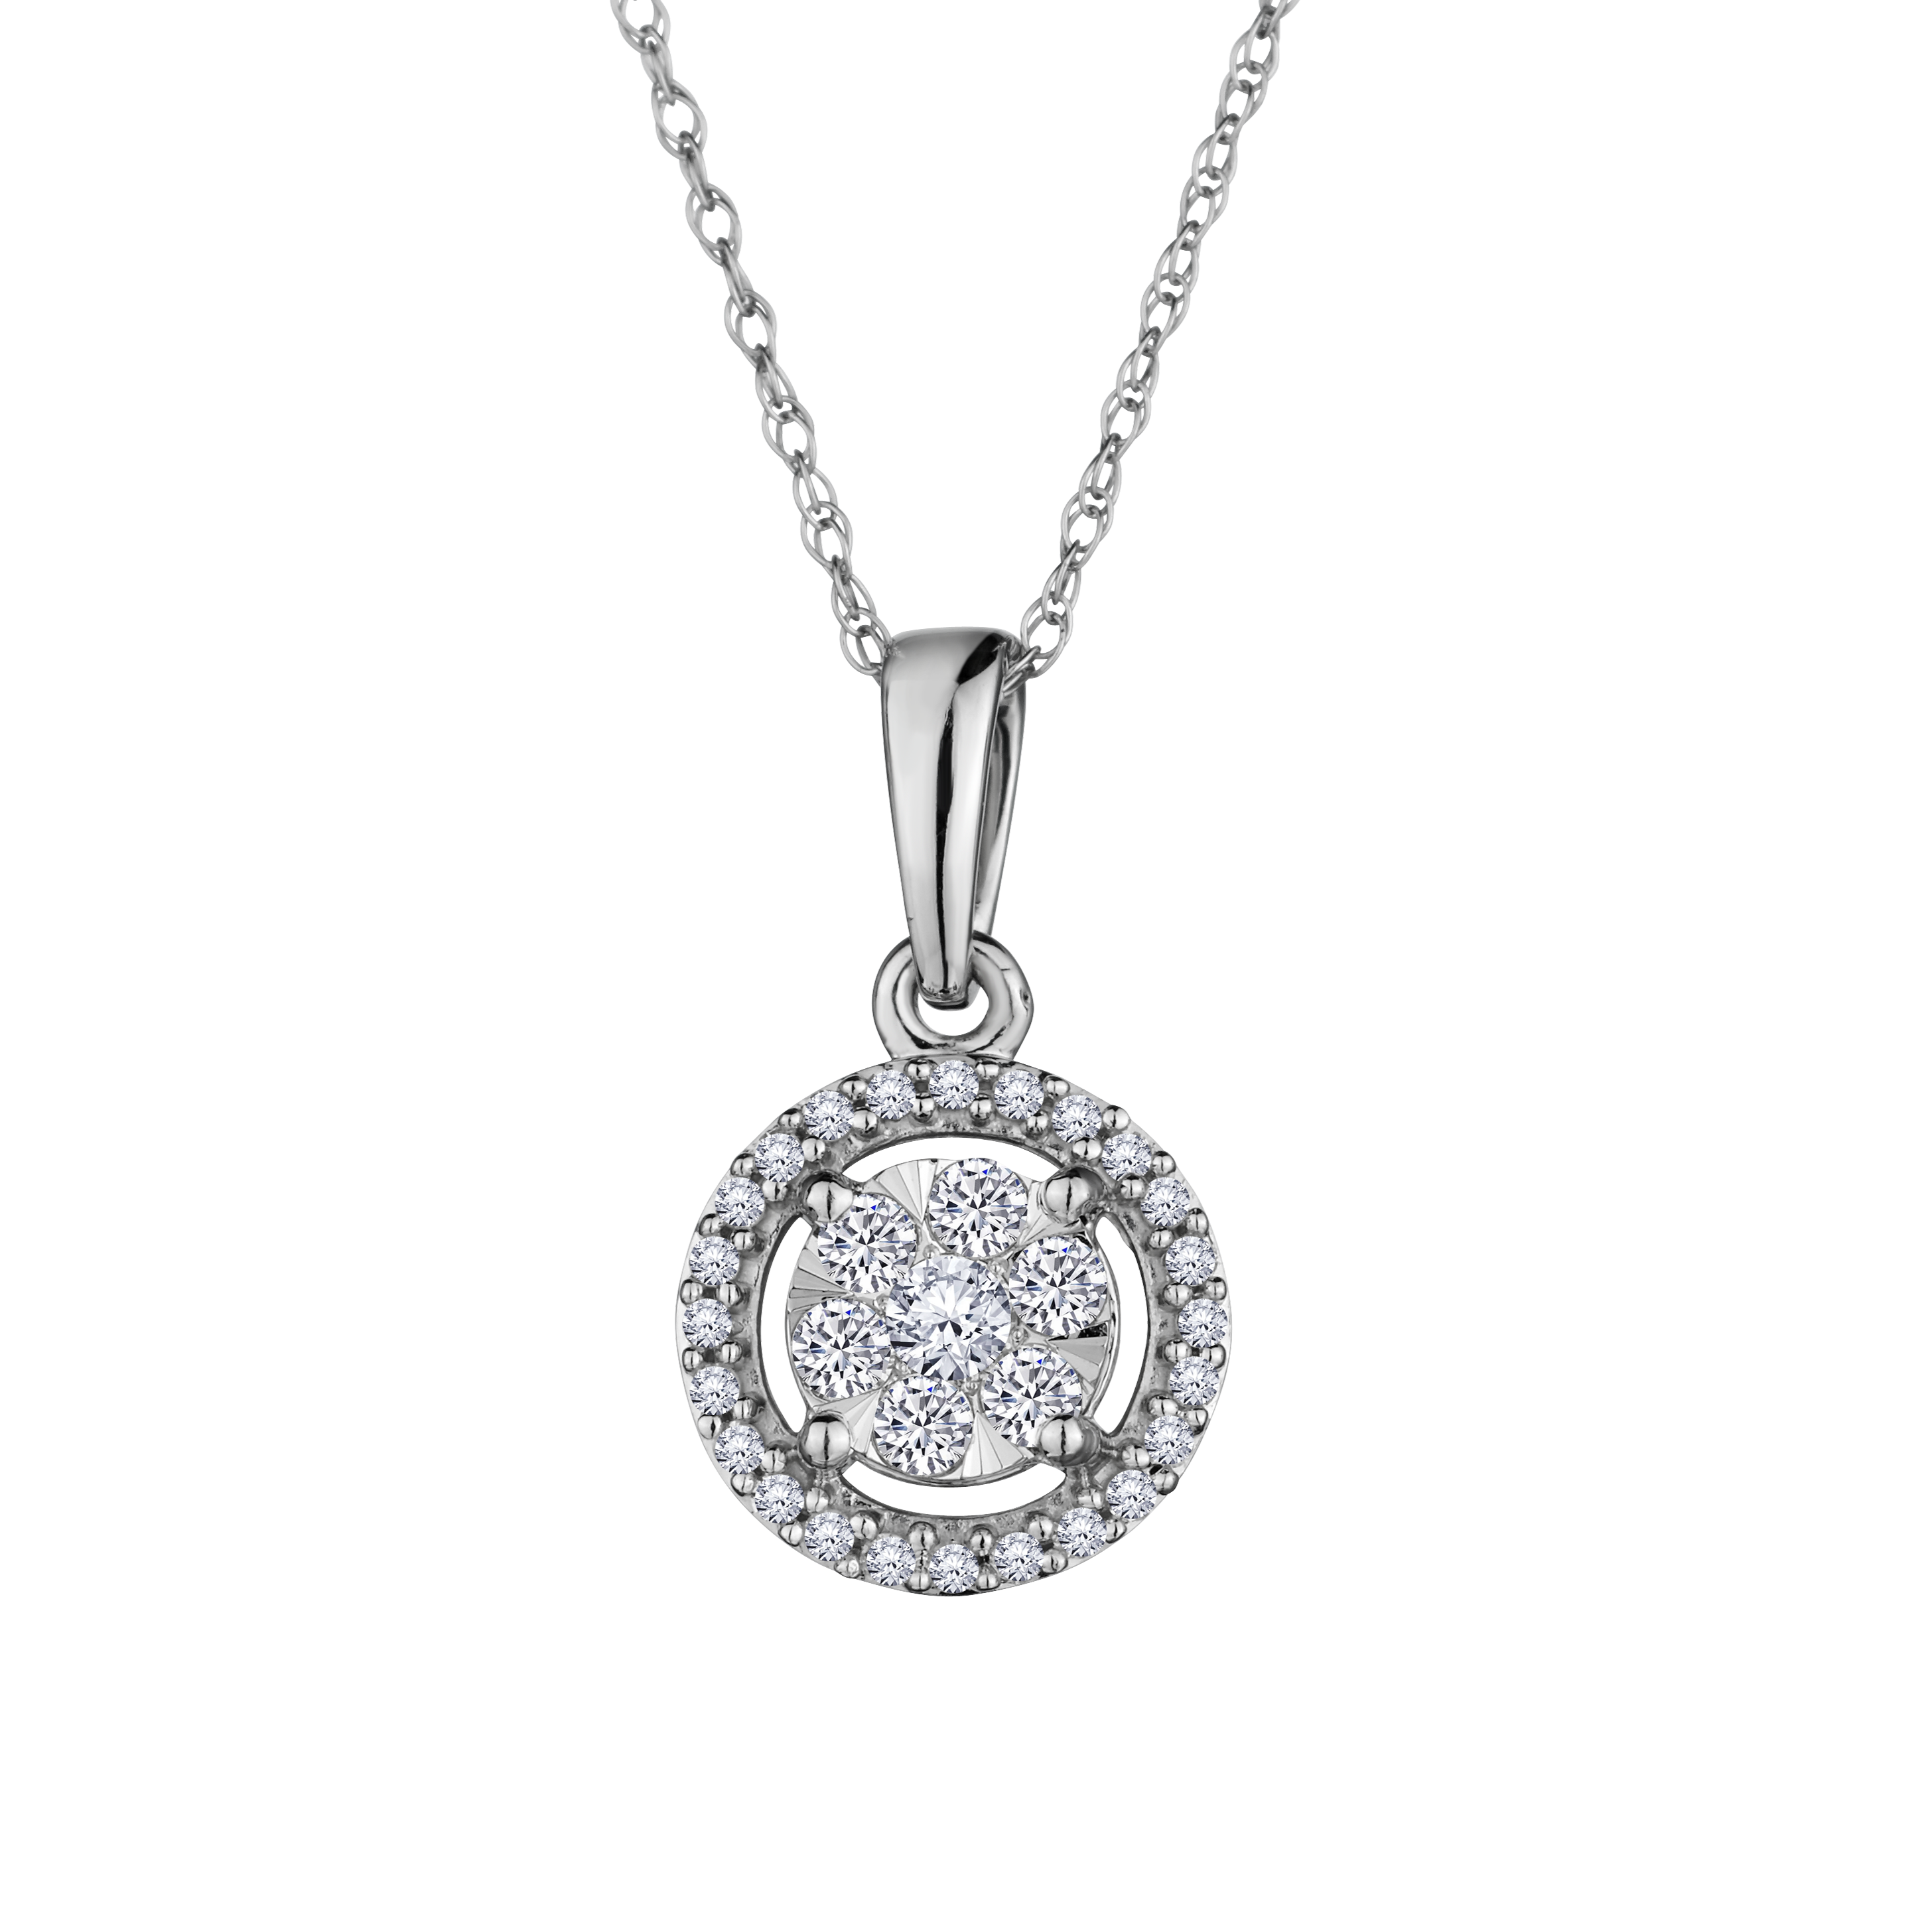 .25 Carat Diamond Halo Pendant, 10kt White Gold. Necklaces and Pendants. Griffin Jewellery Designs.